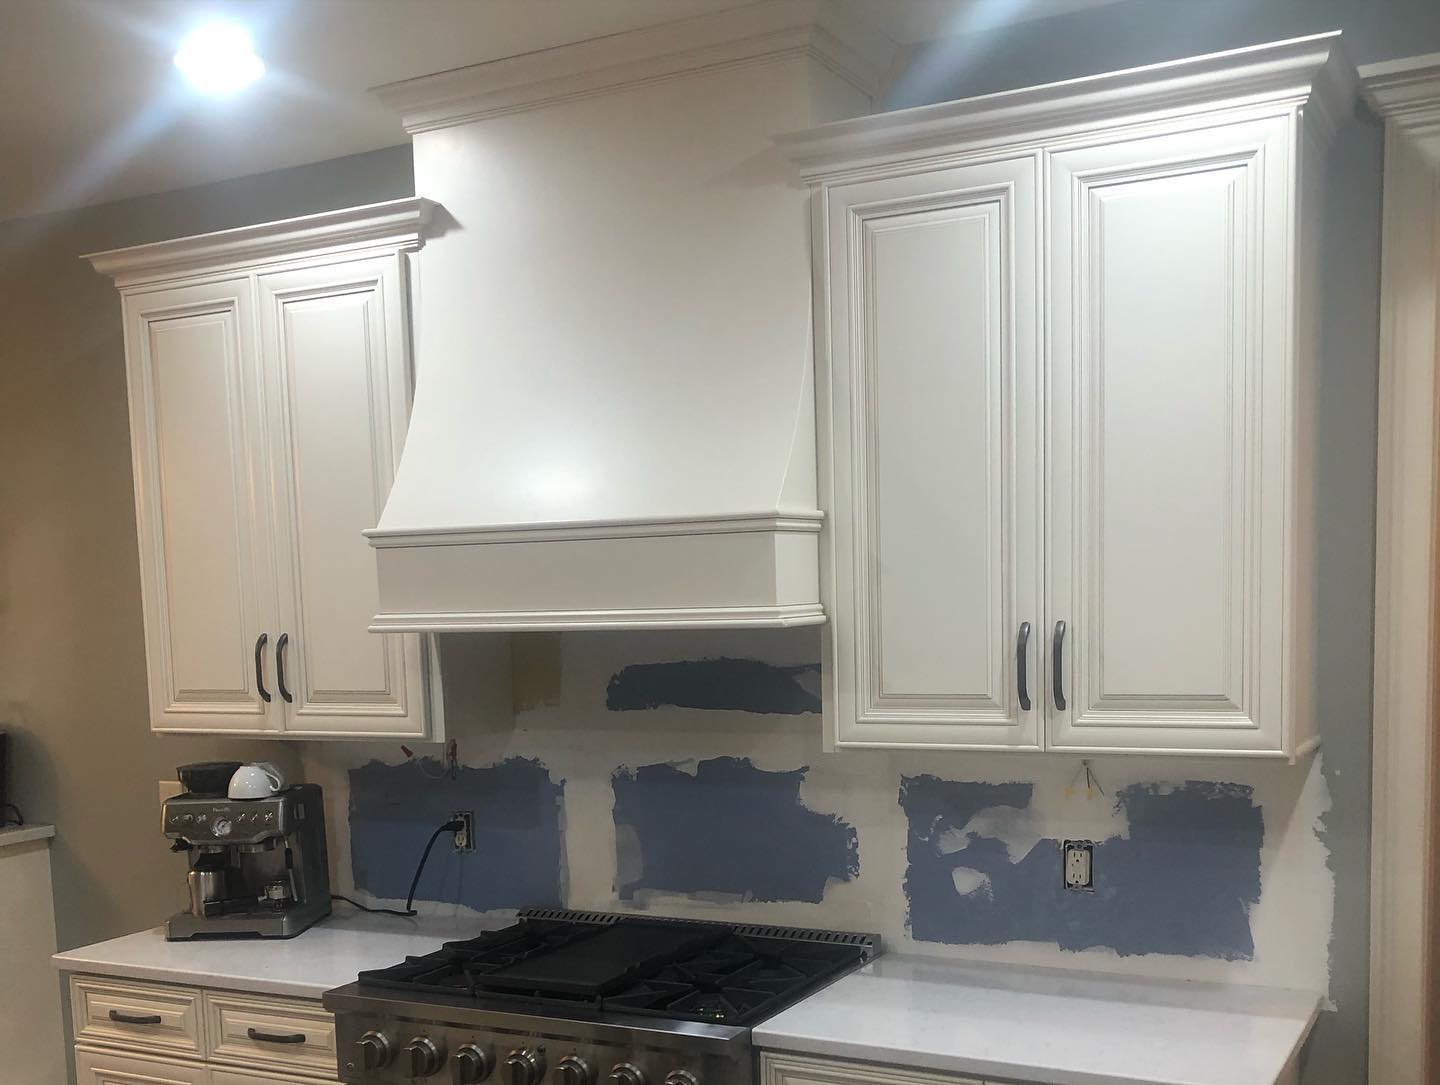 New White Kitchen Cabinets Wall Mounted and Bases 2